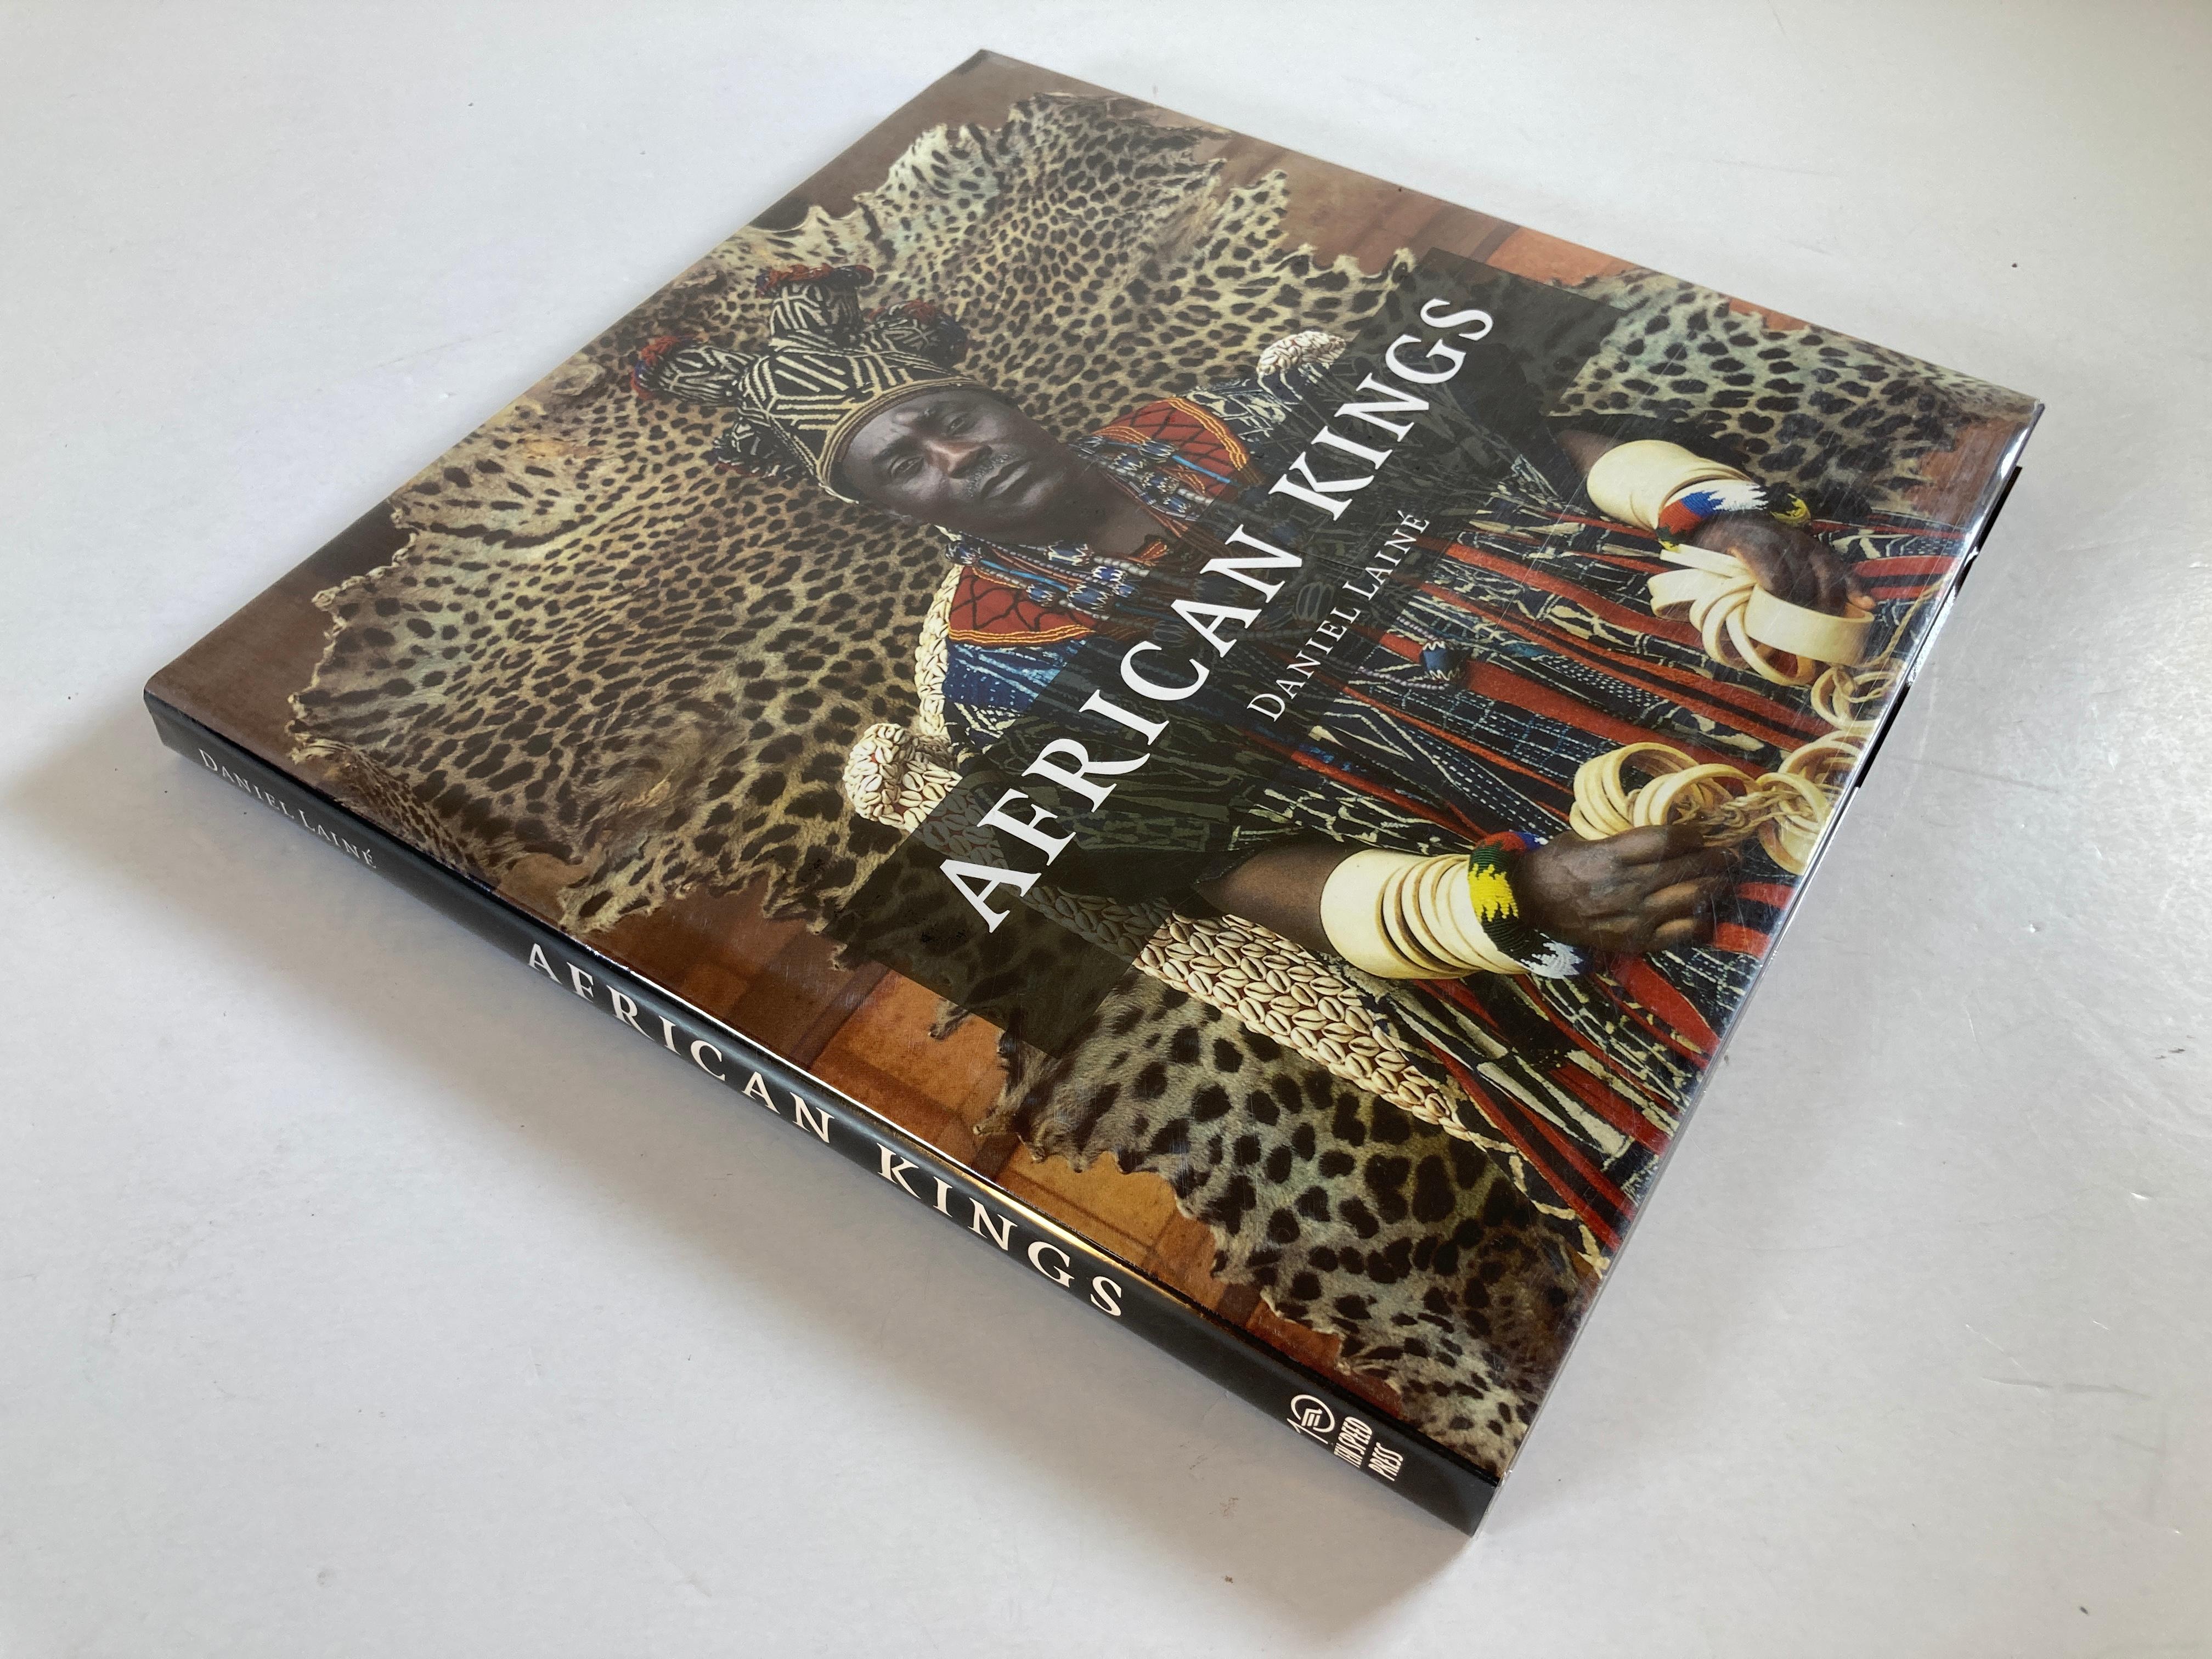 African Kings Portraits of a Disappearing Era by Daniel Laine.
Hardcover coffee table book.
Even today there are close to 100 tribal kings in Africa, vestiges of a former age—their ancient traditions preserved, their wisdom and power still